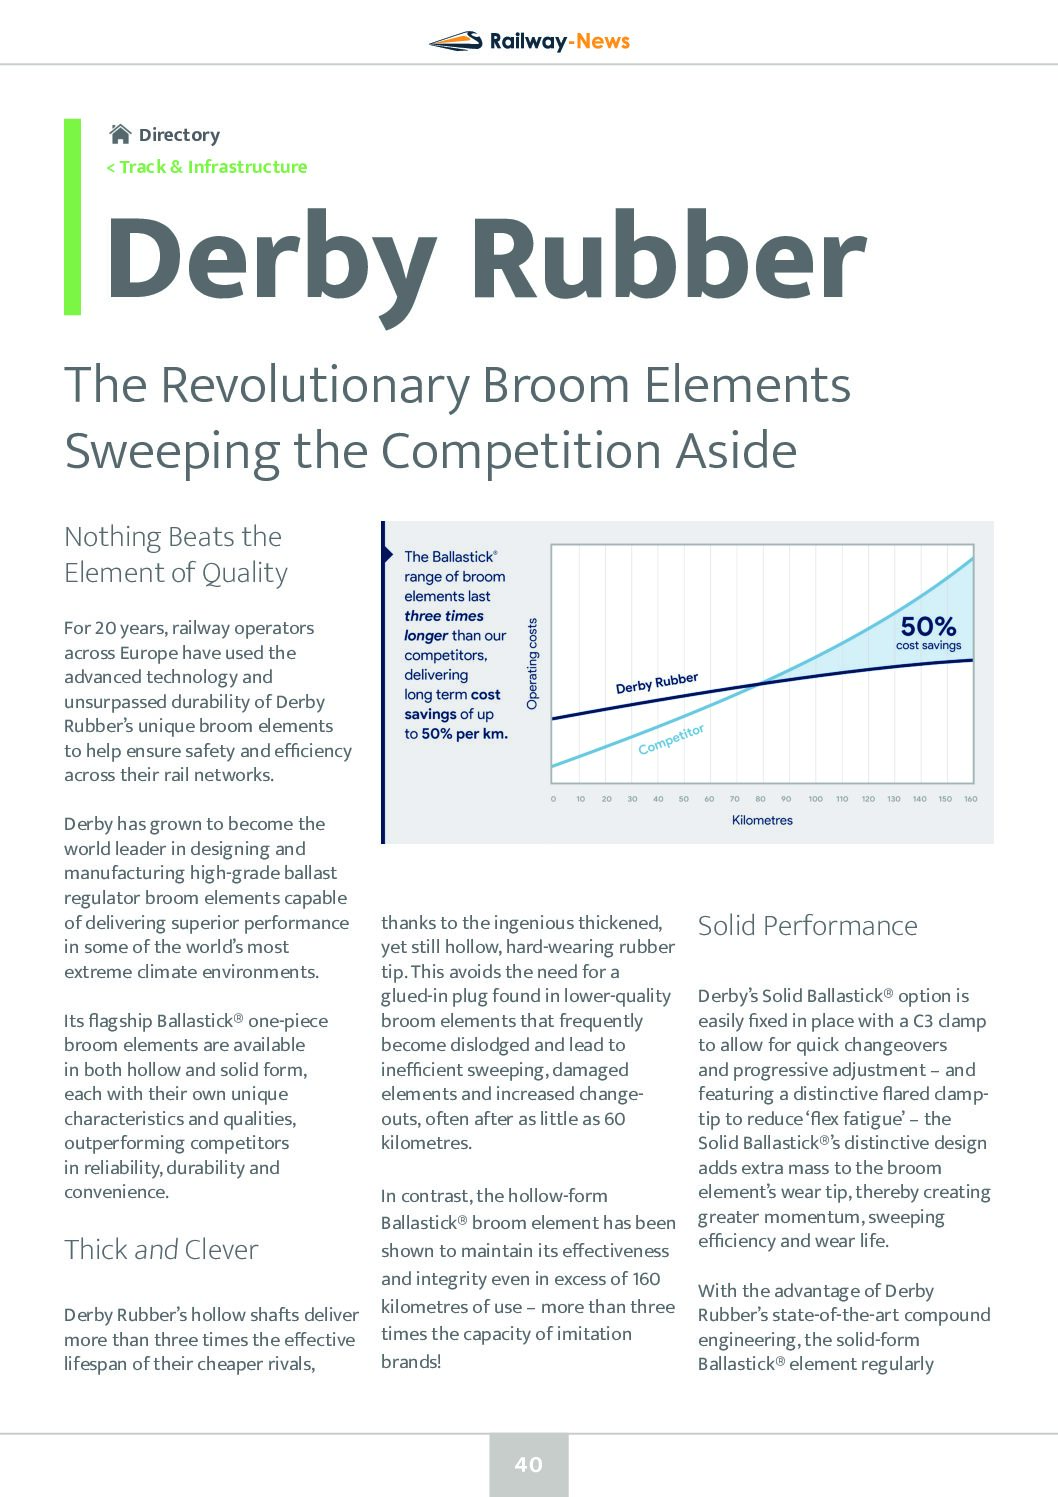 Derby Rubber – The Revolutionary Broom Elements Sweeping the Competition Aside